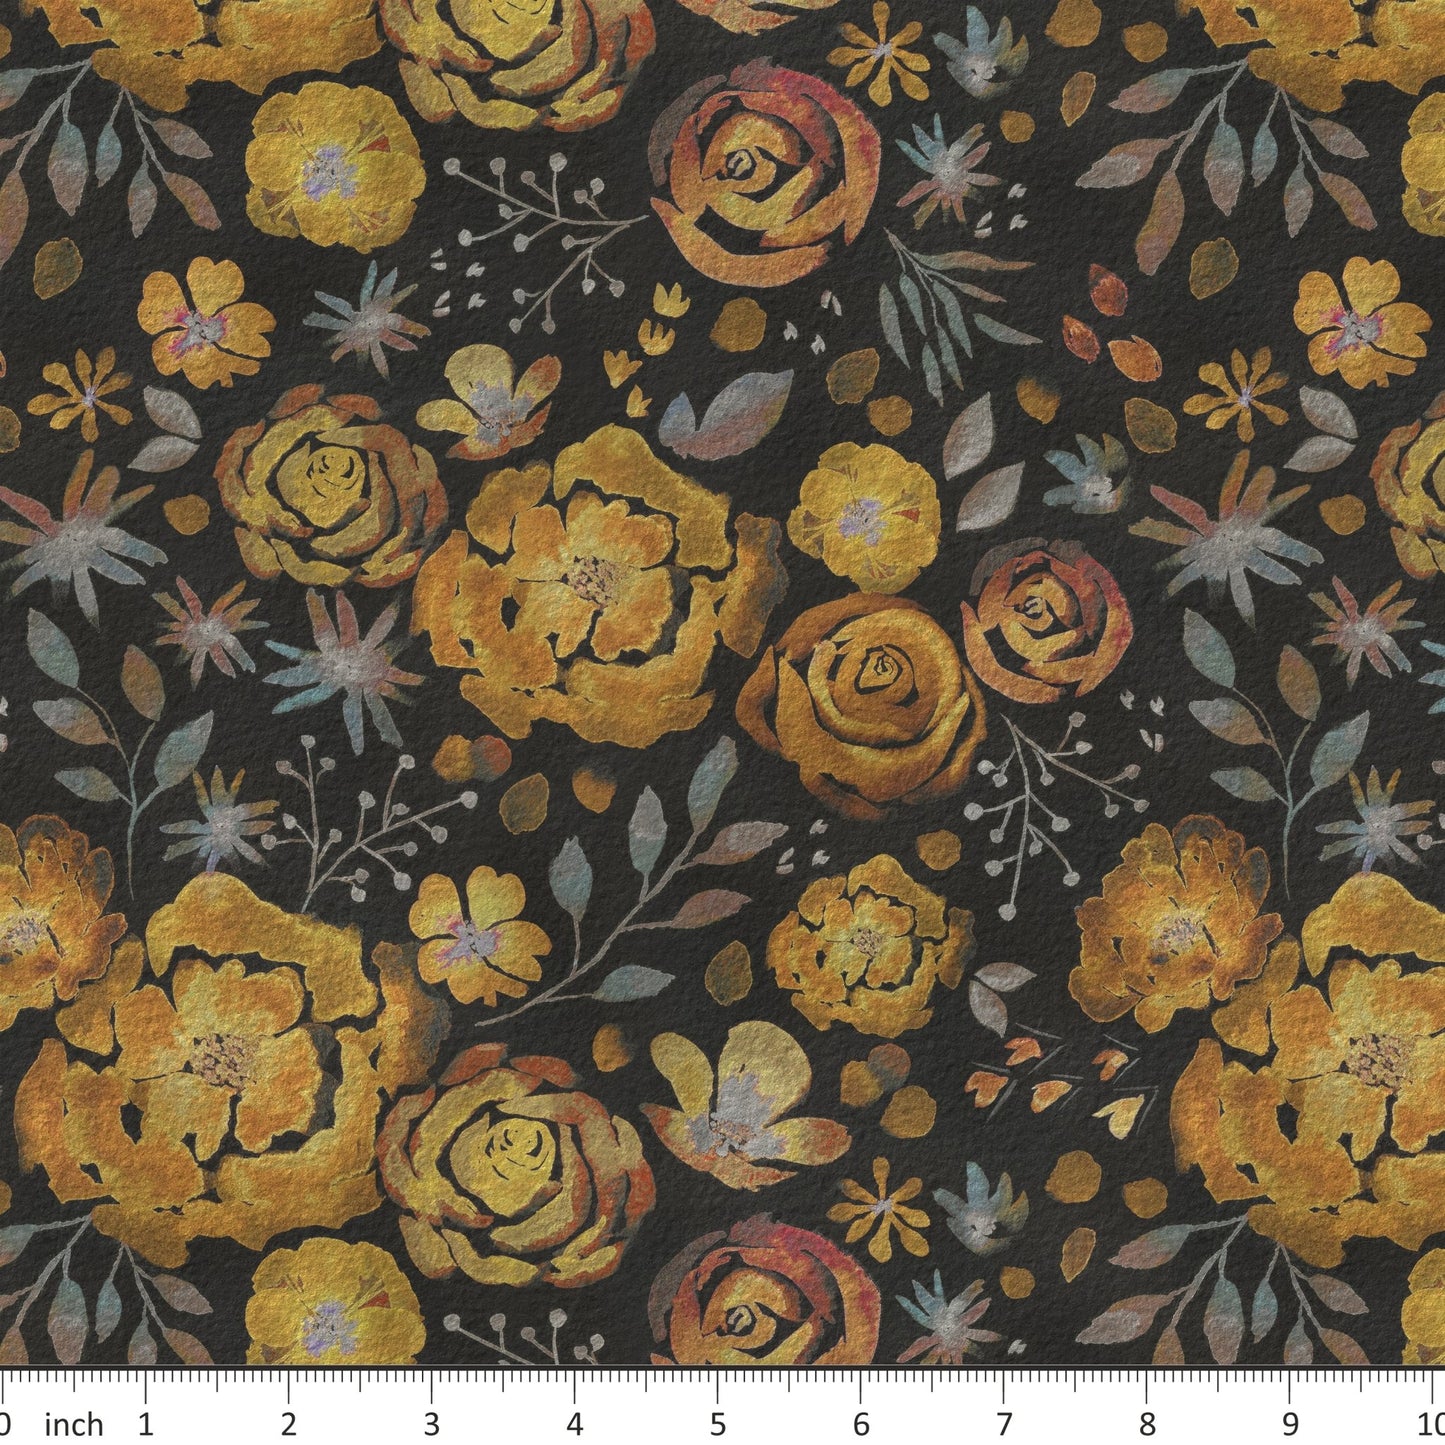 Tatra Cottage - Earthy Autumn Floral - Little Rhody Sewing Co.